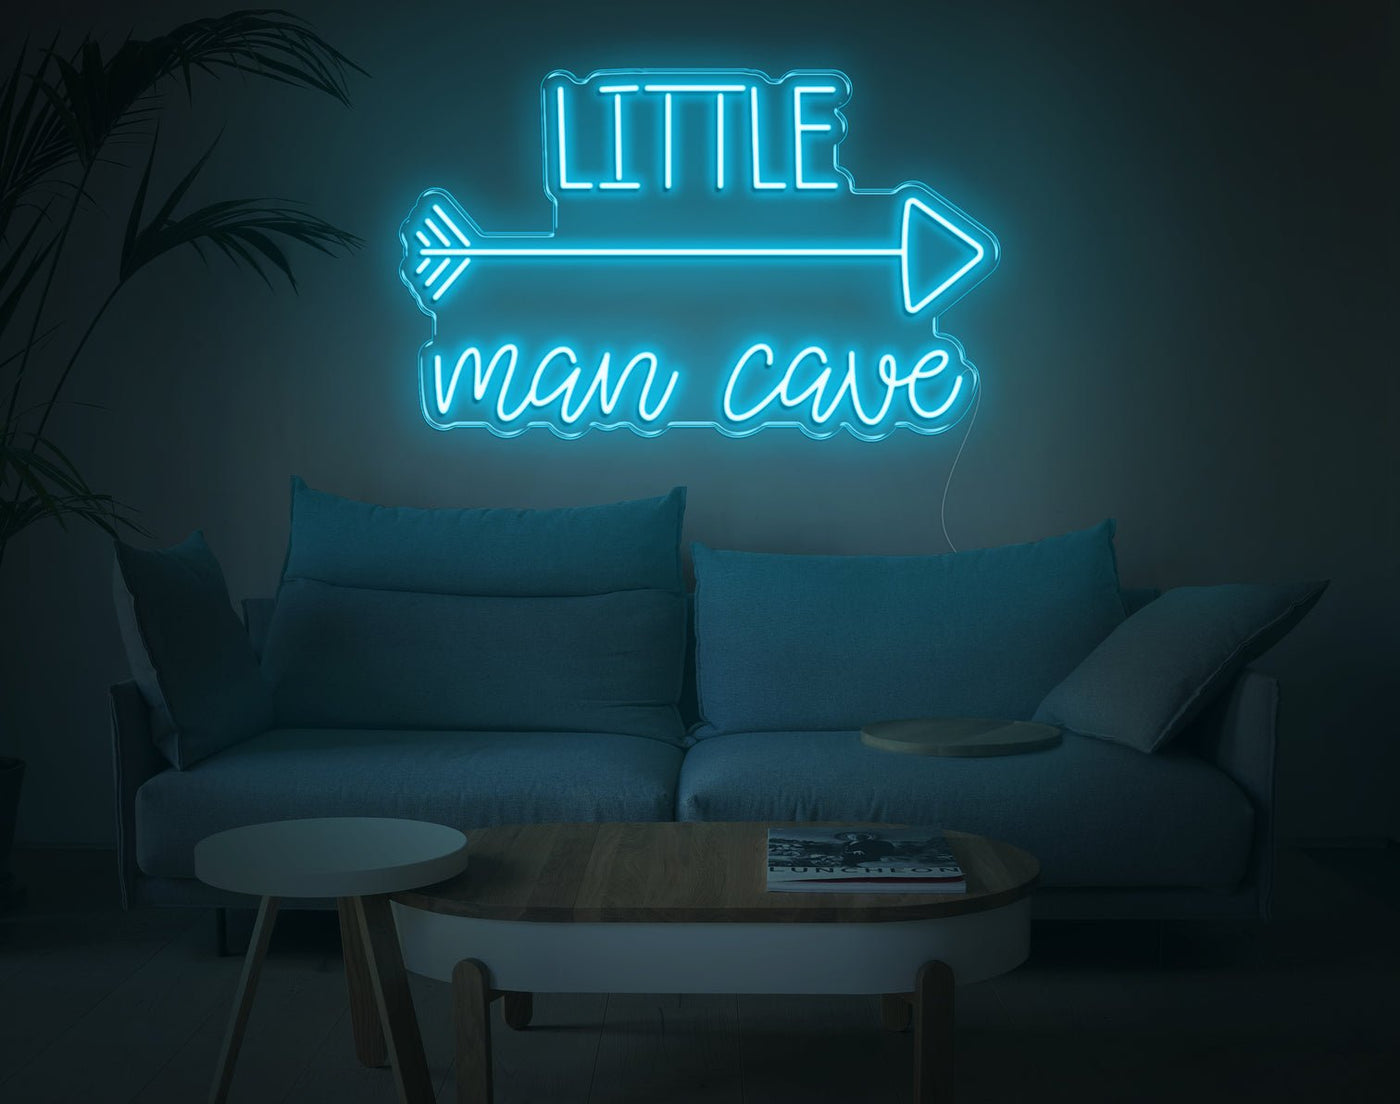 Little Man Cave LED Neon Sign - 19inch x 30inchHot Pink